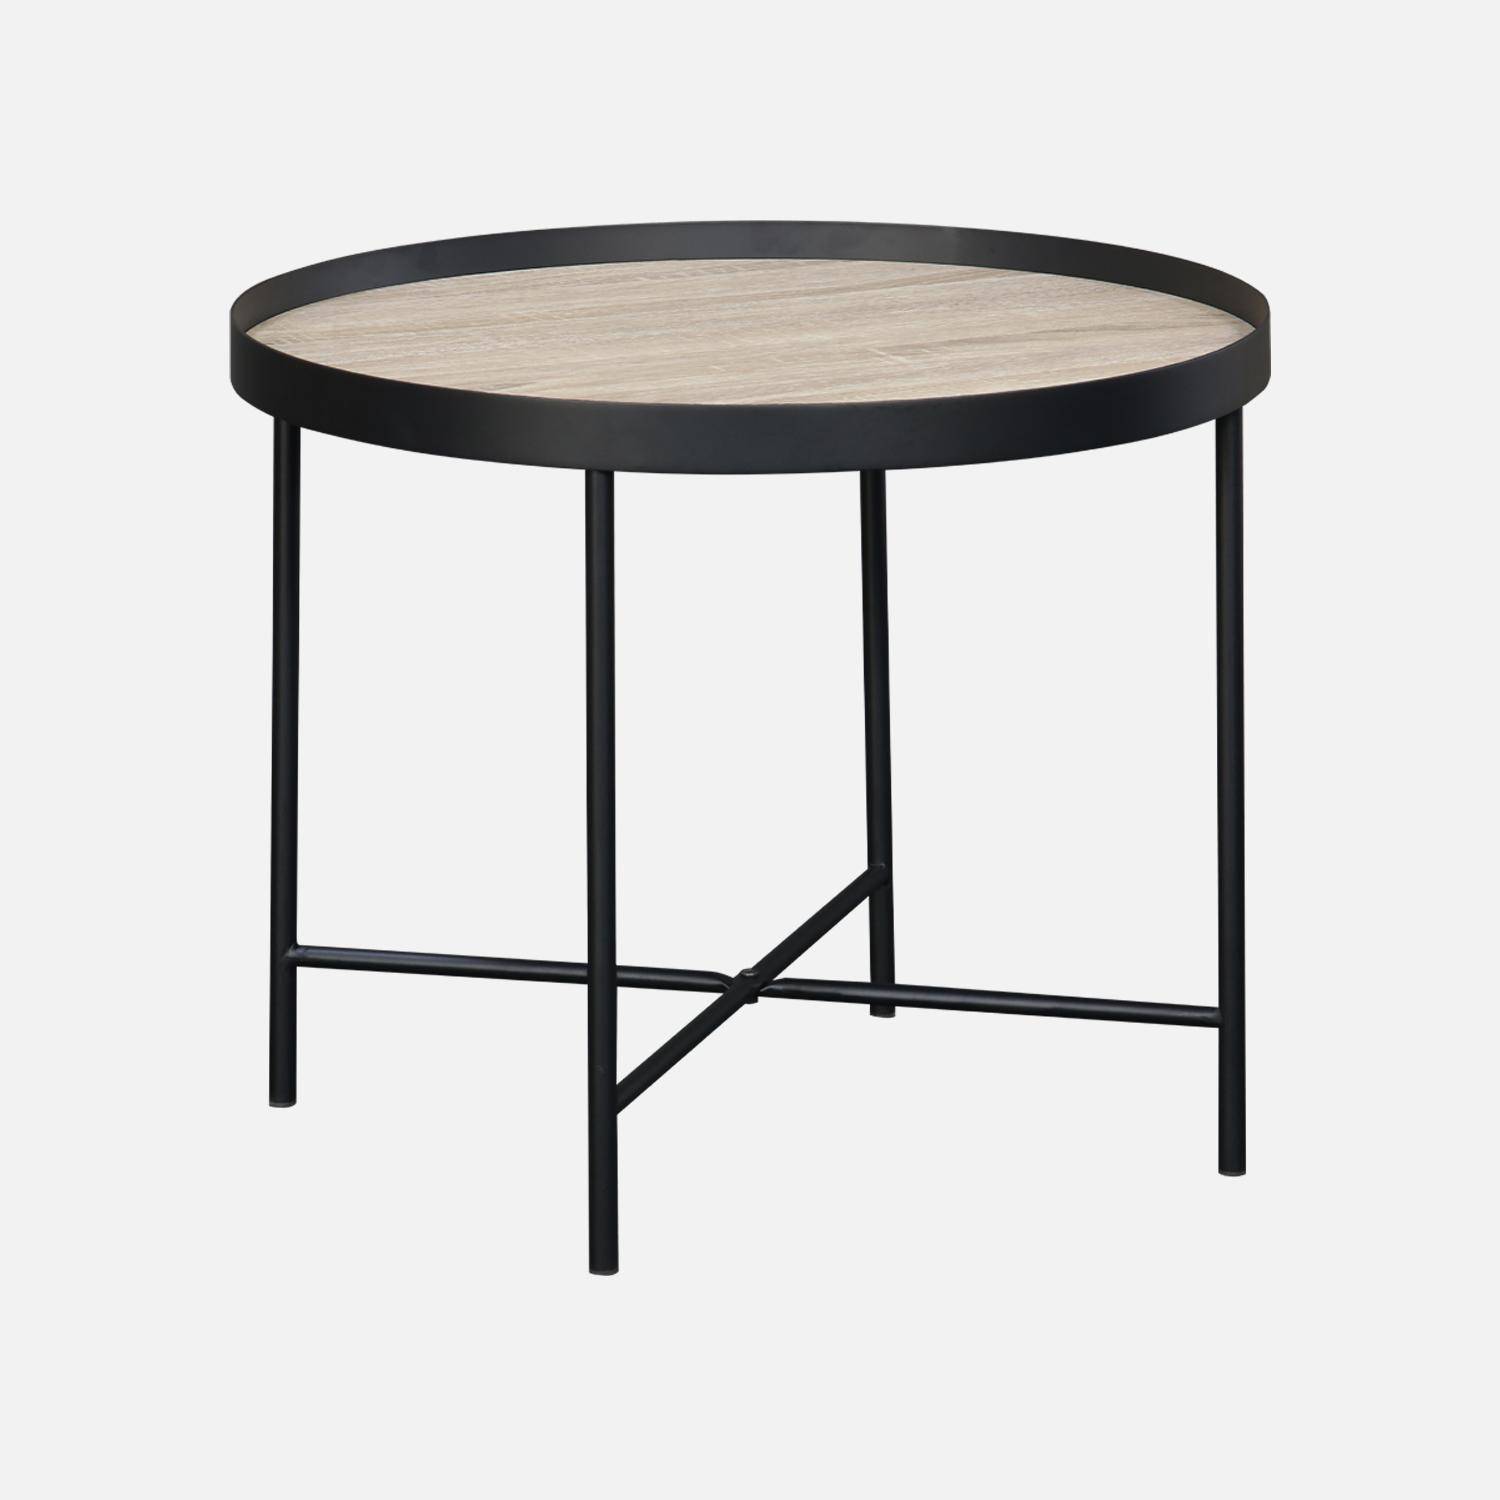 Set of 2 practical round nesting tables in oak-effect MDF with black legs,sweeek,Photo4